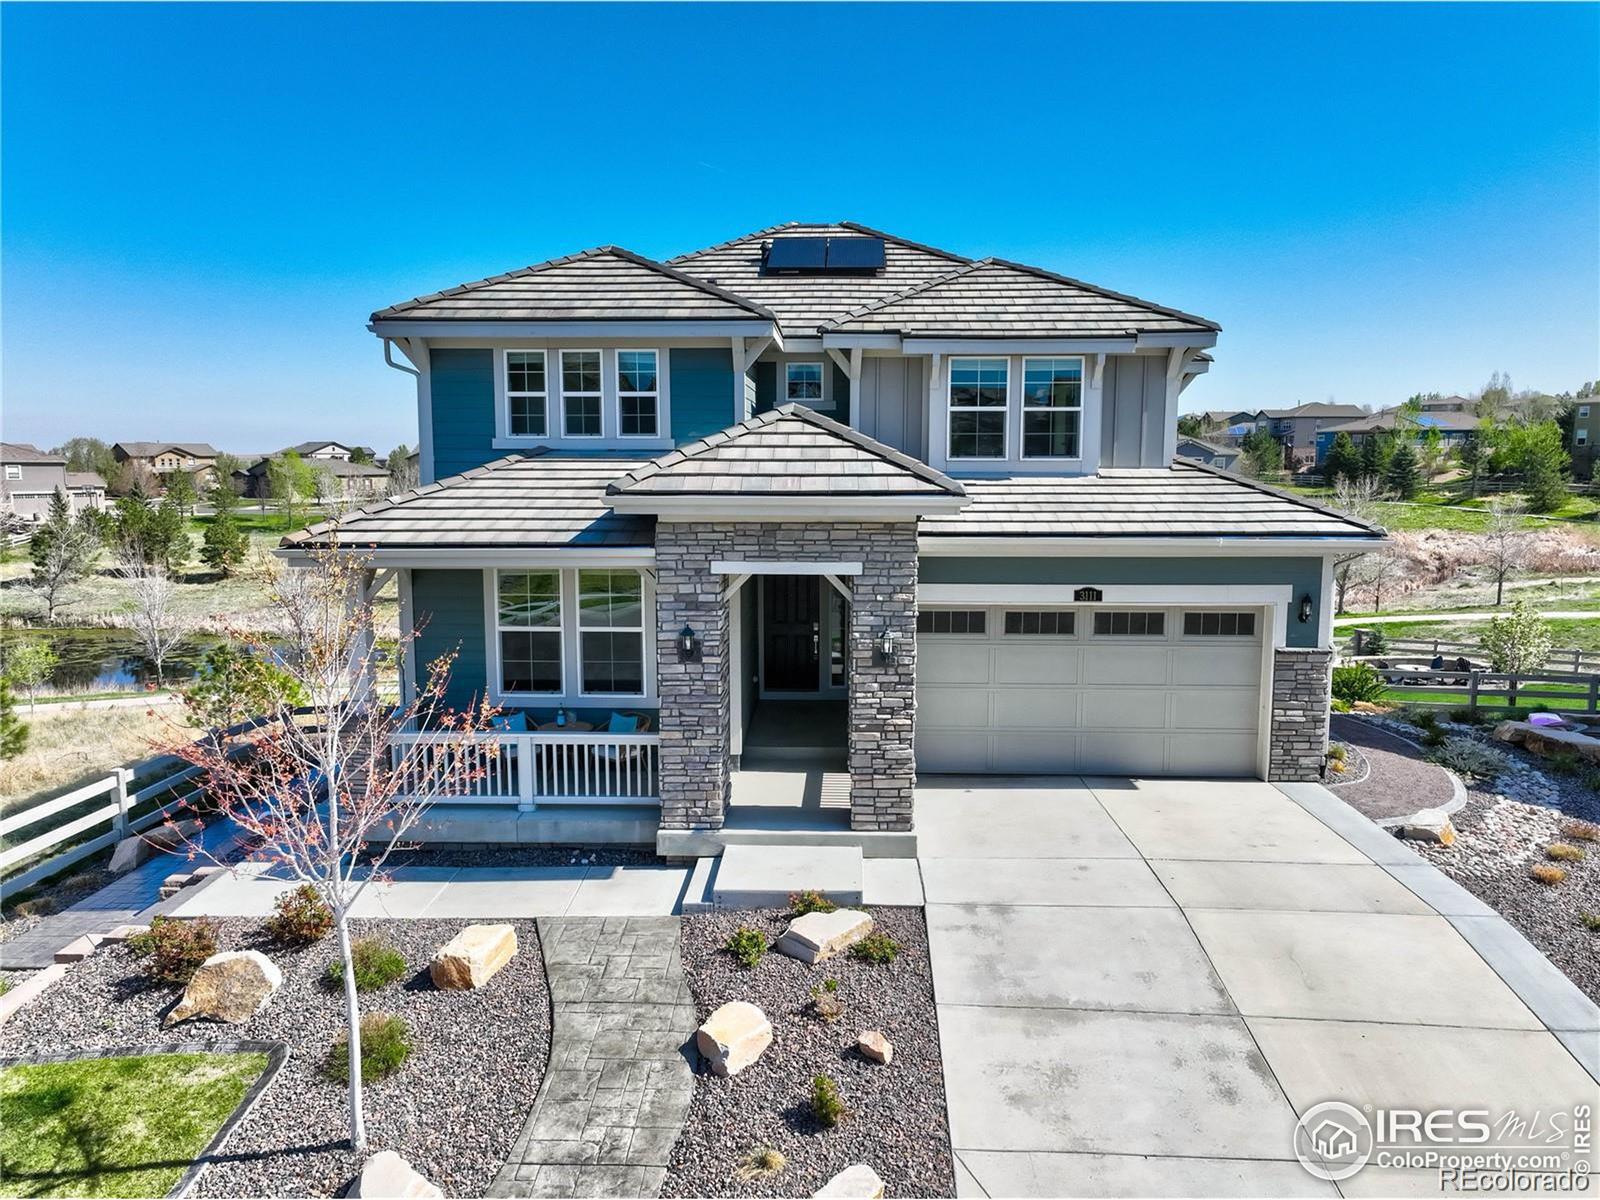 Report Image for 3111  Beckwith Run,Broomfield, Colorado